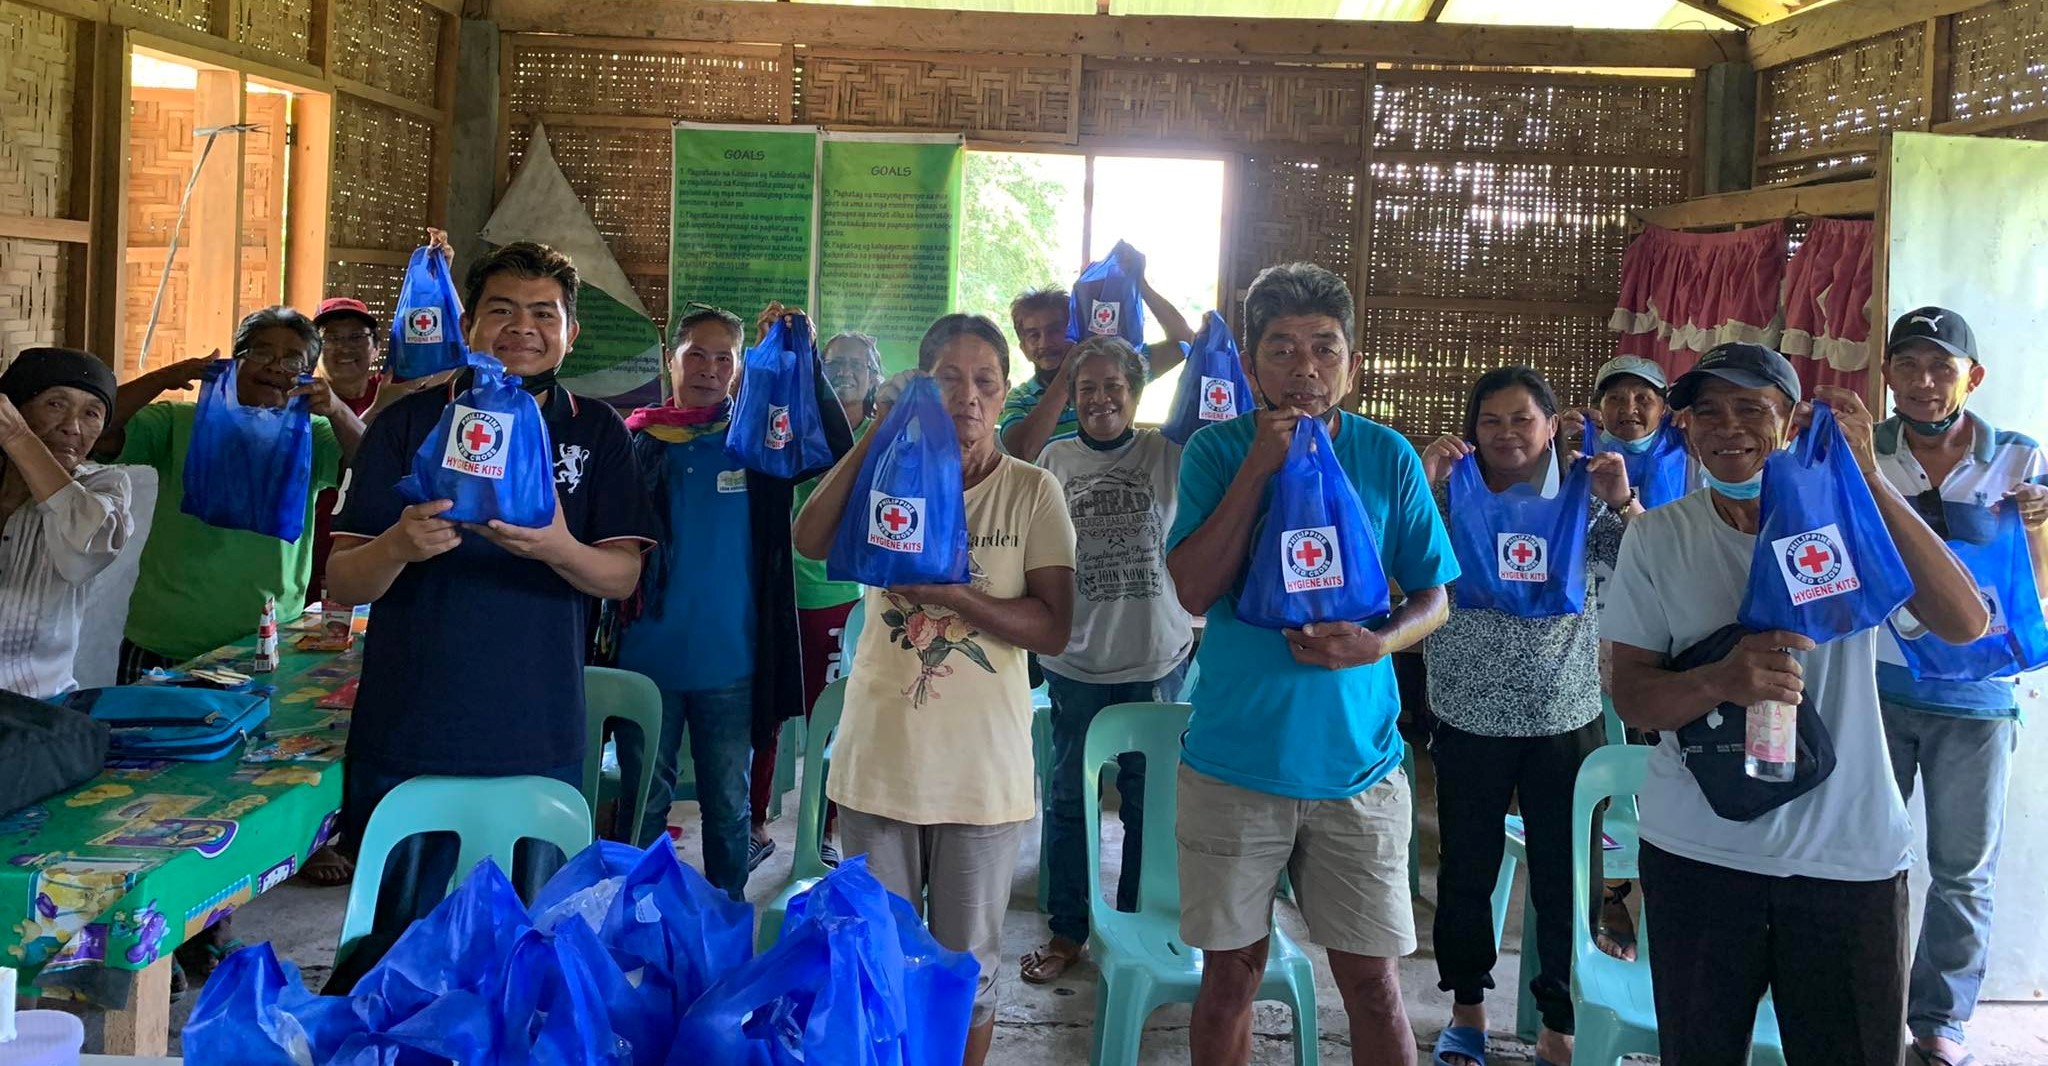 P&G continues hand hygiene promotion efforts with the Philippine Red Cross